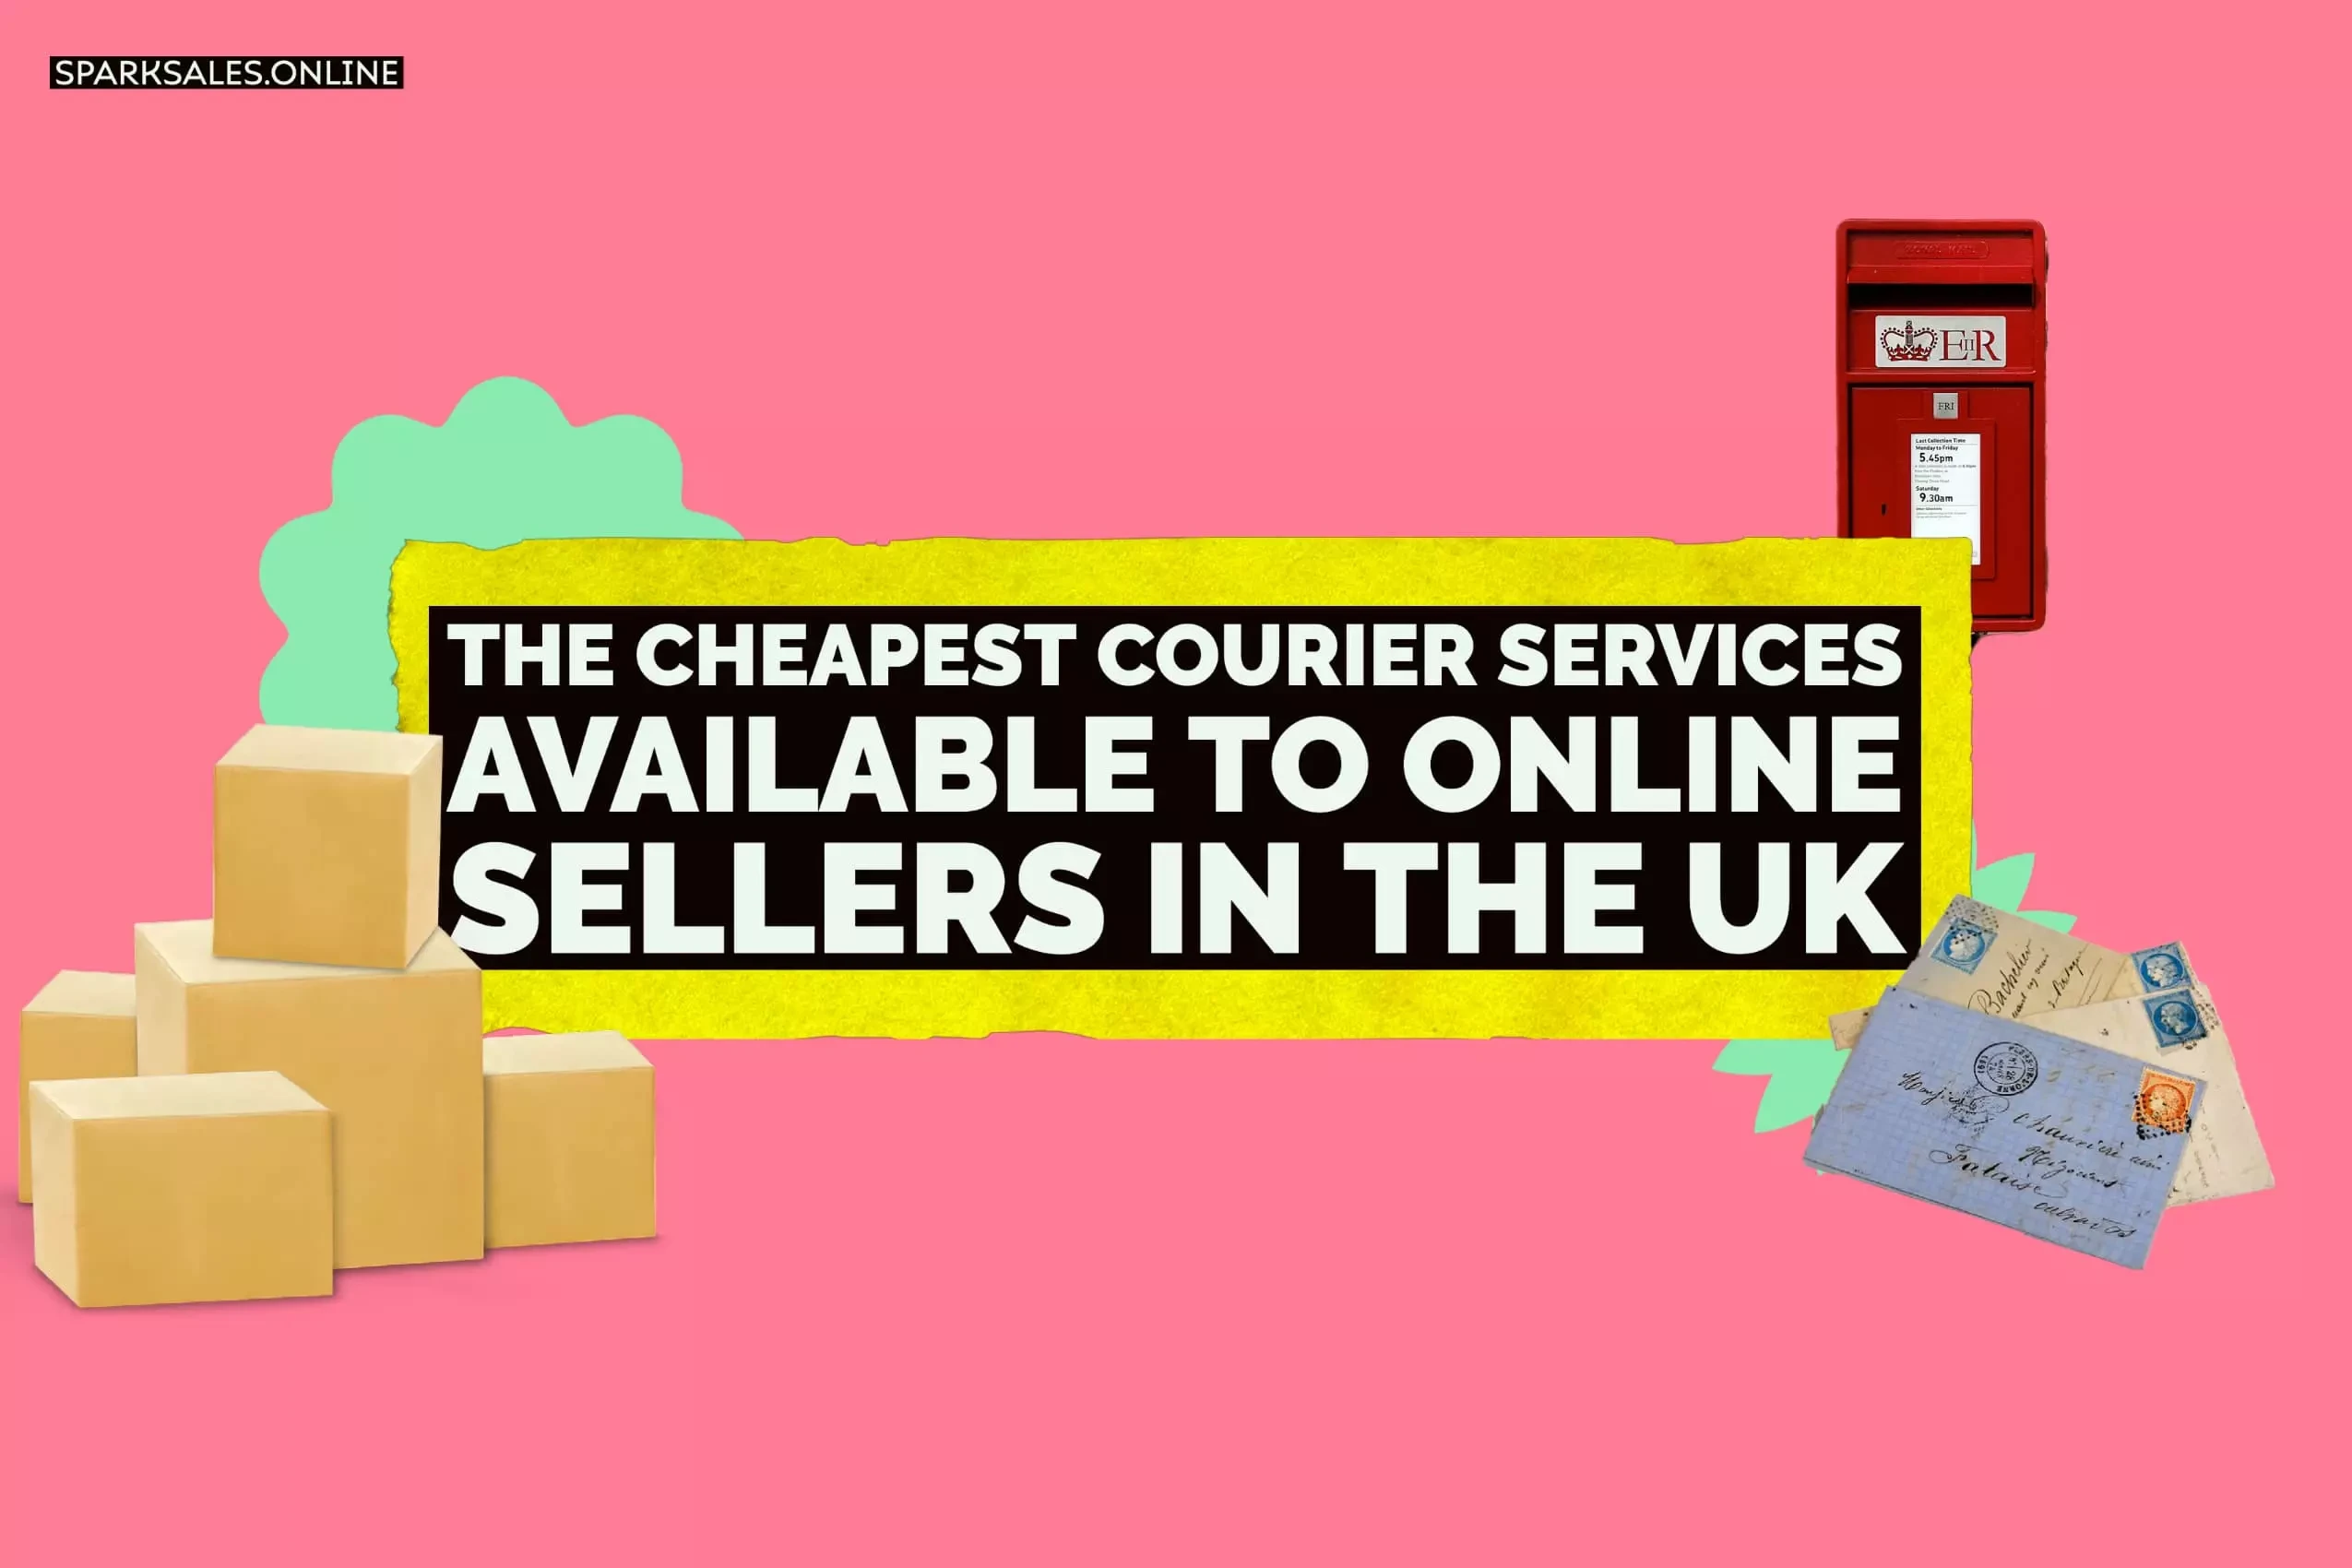 The Cheapest Courier Services Available to Online Sellers in the UK